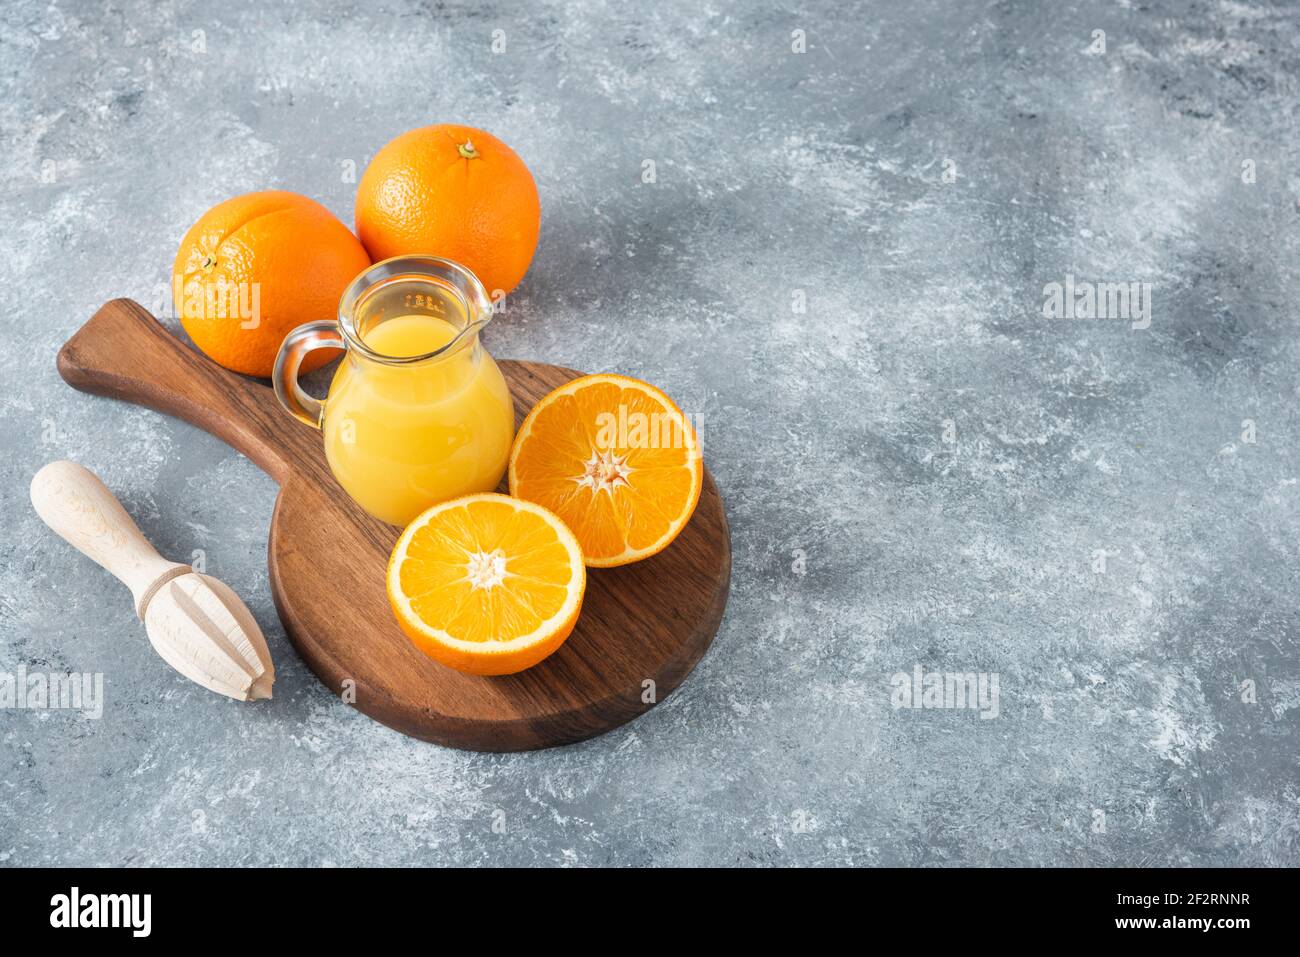 A wooden board full of juicy slices of orange fruit on stone background Stock Photo